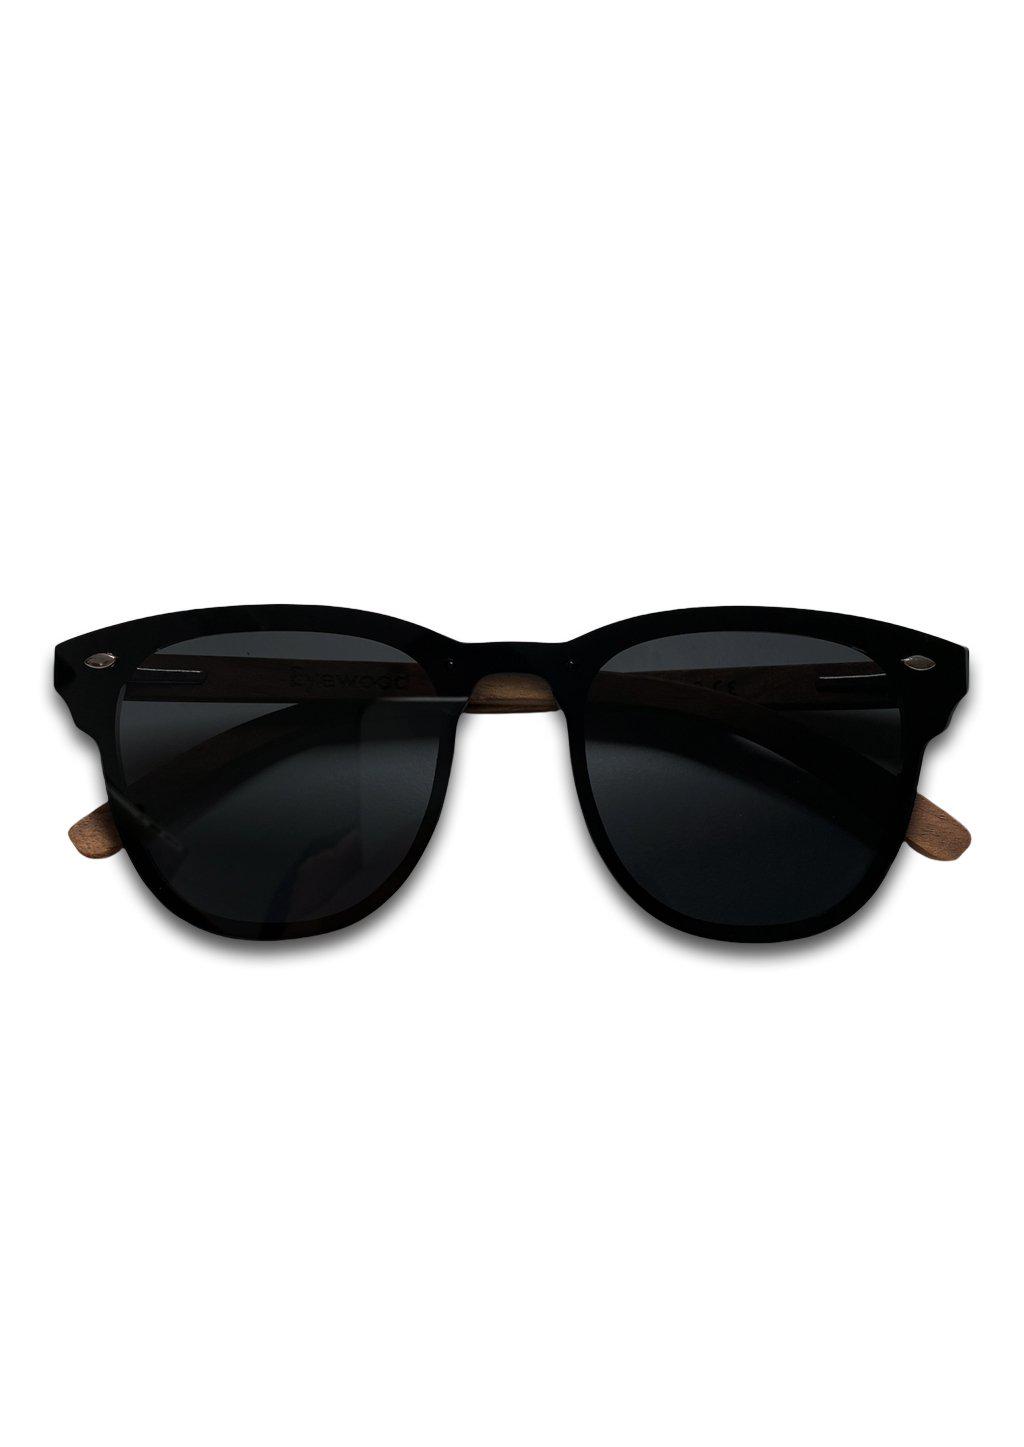 Eyewood tomorrow is our modern cool take on classic models. This is Fornax with black lenses. With walnut wooden sides.